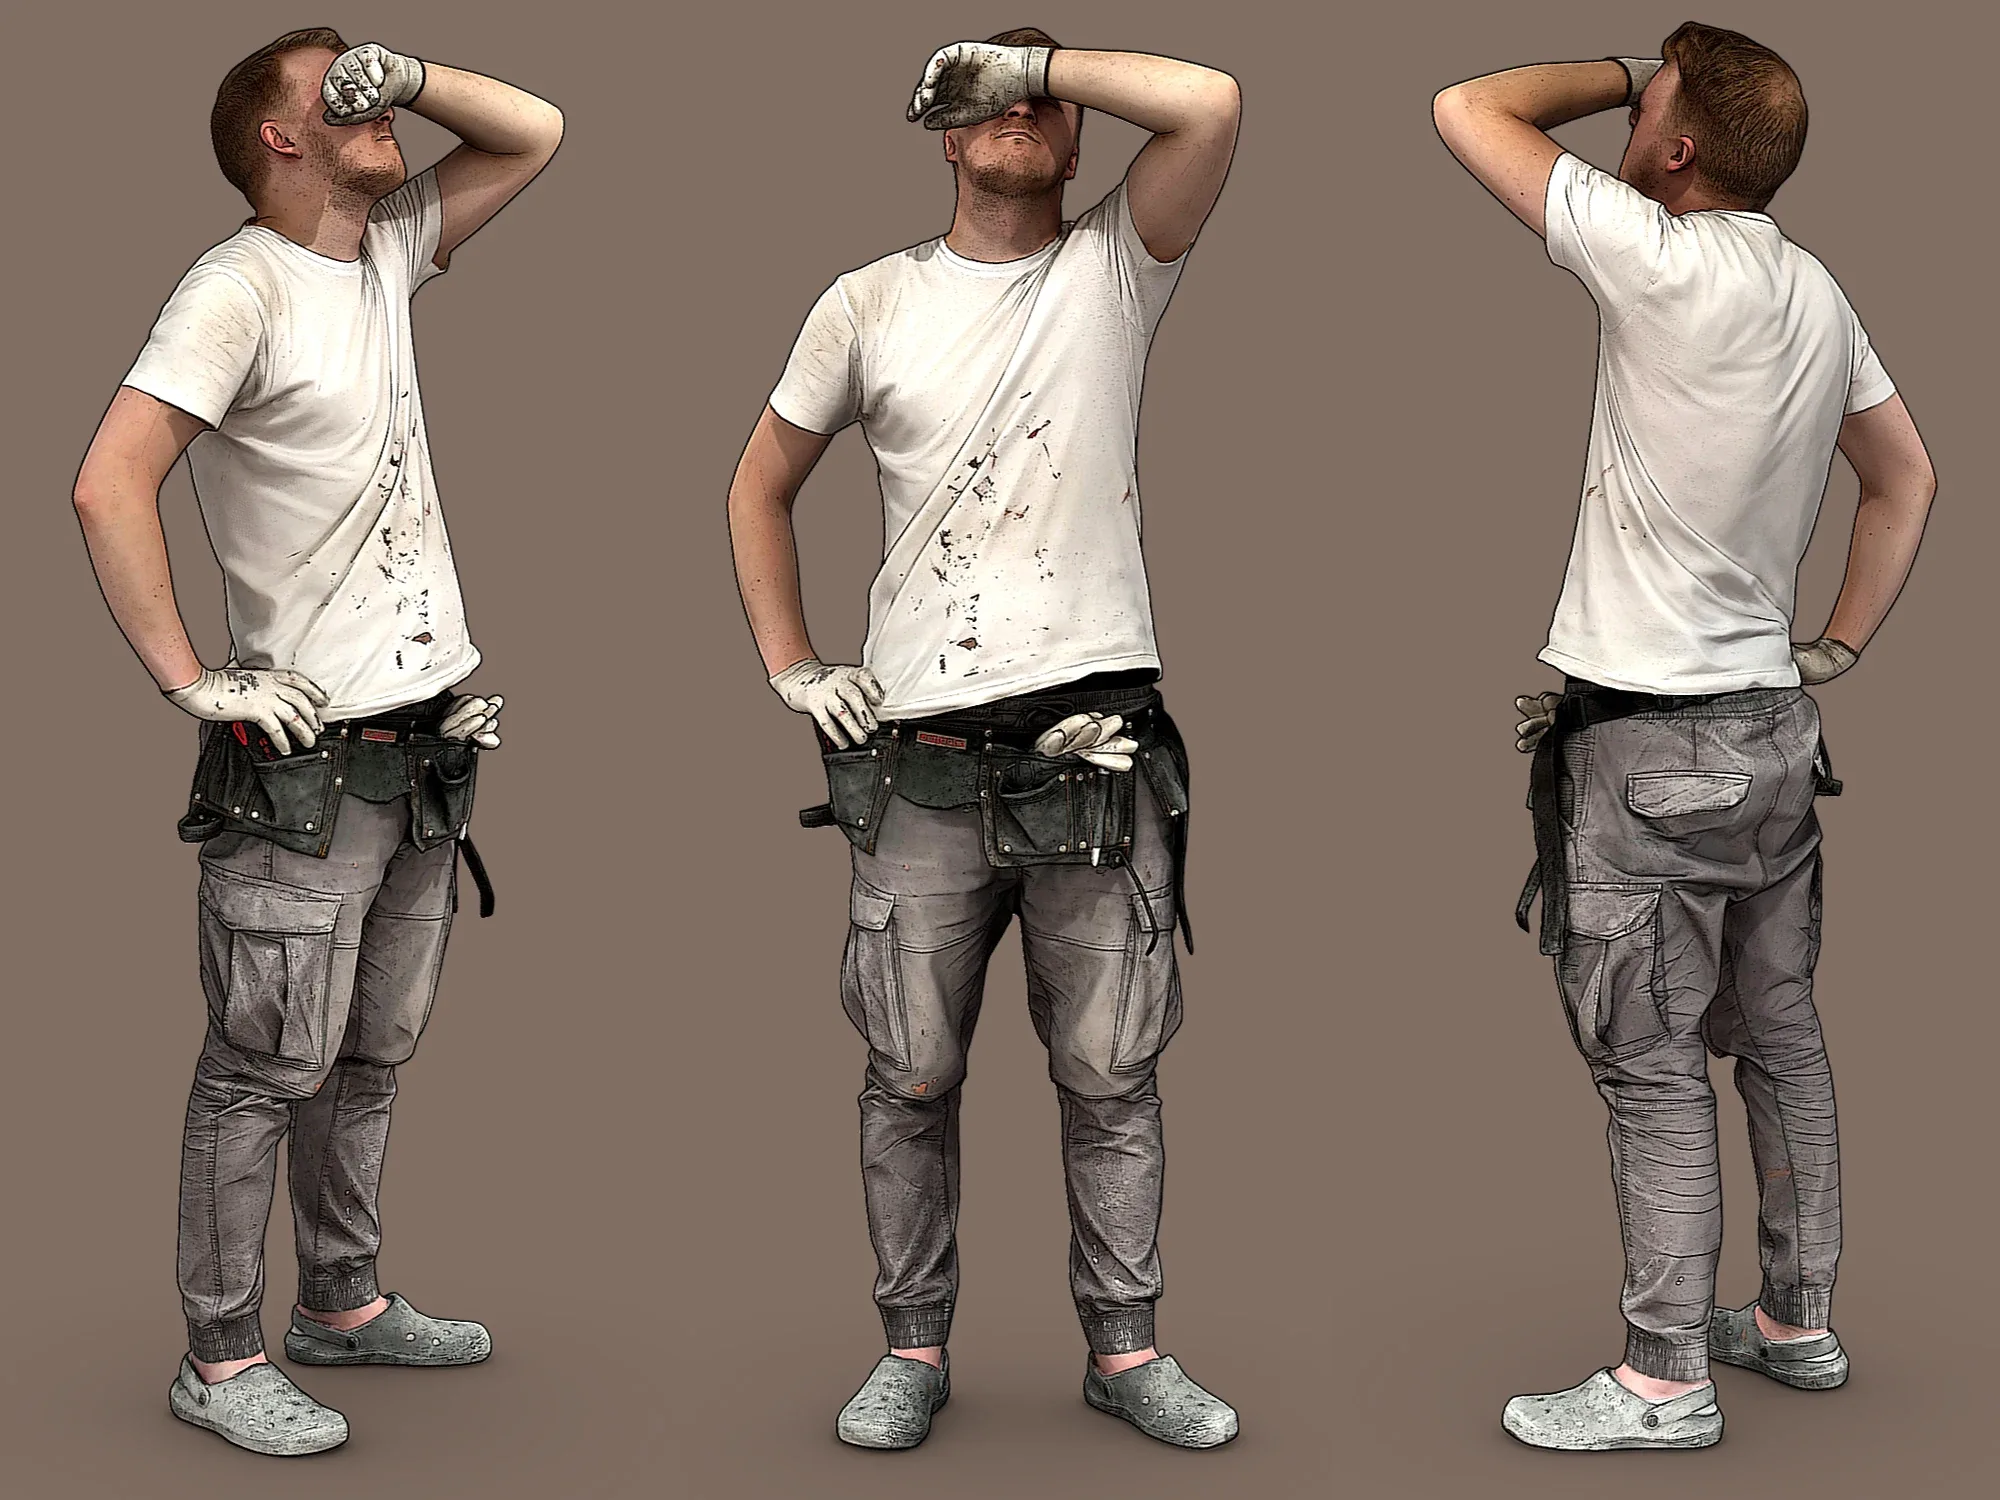 Worker in a White T-shirt model pack